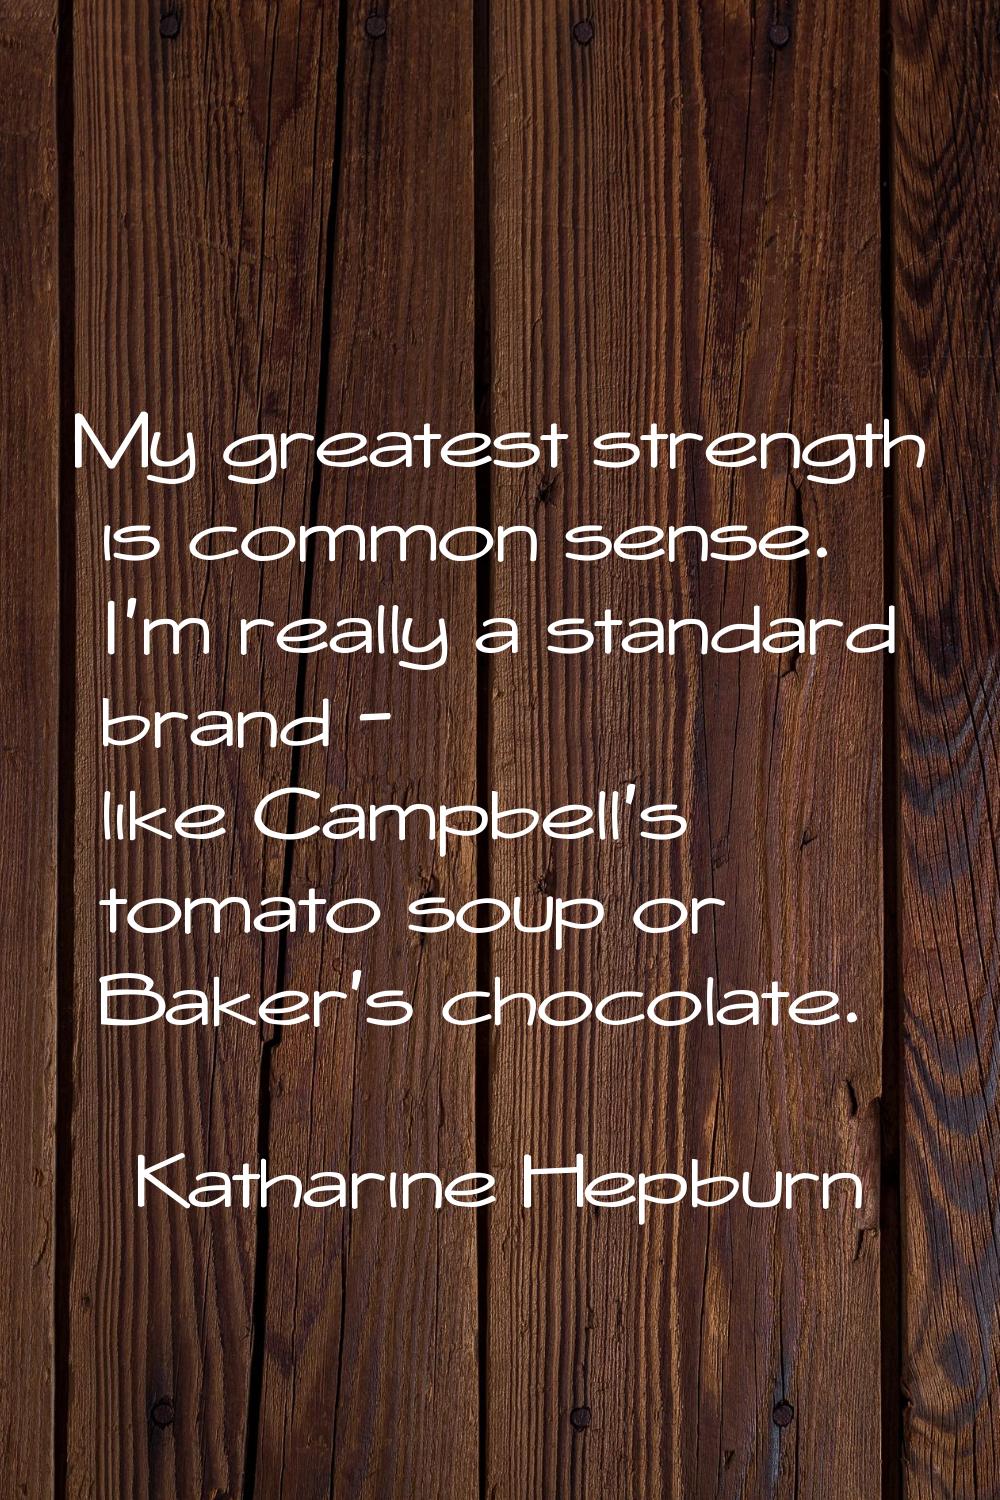 My greatest strength is common sense. I'm really a standard brand - like Campbell's tomato soup or 